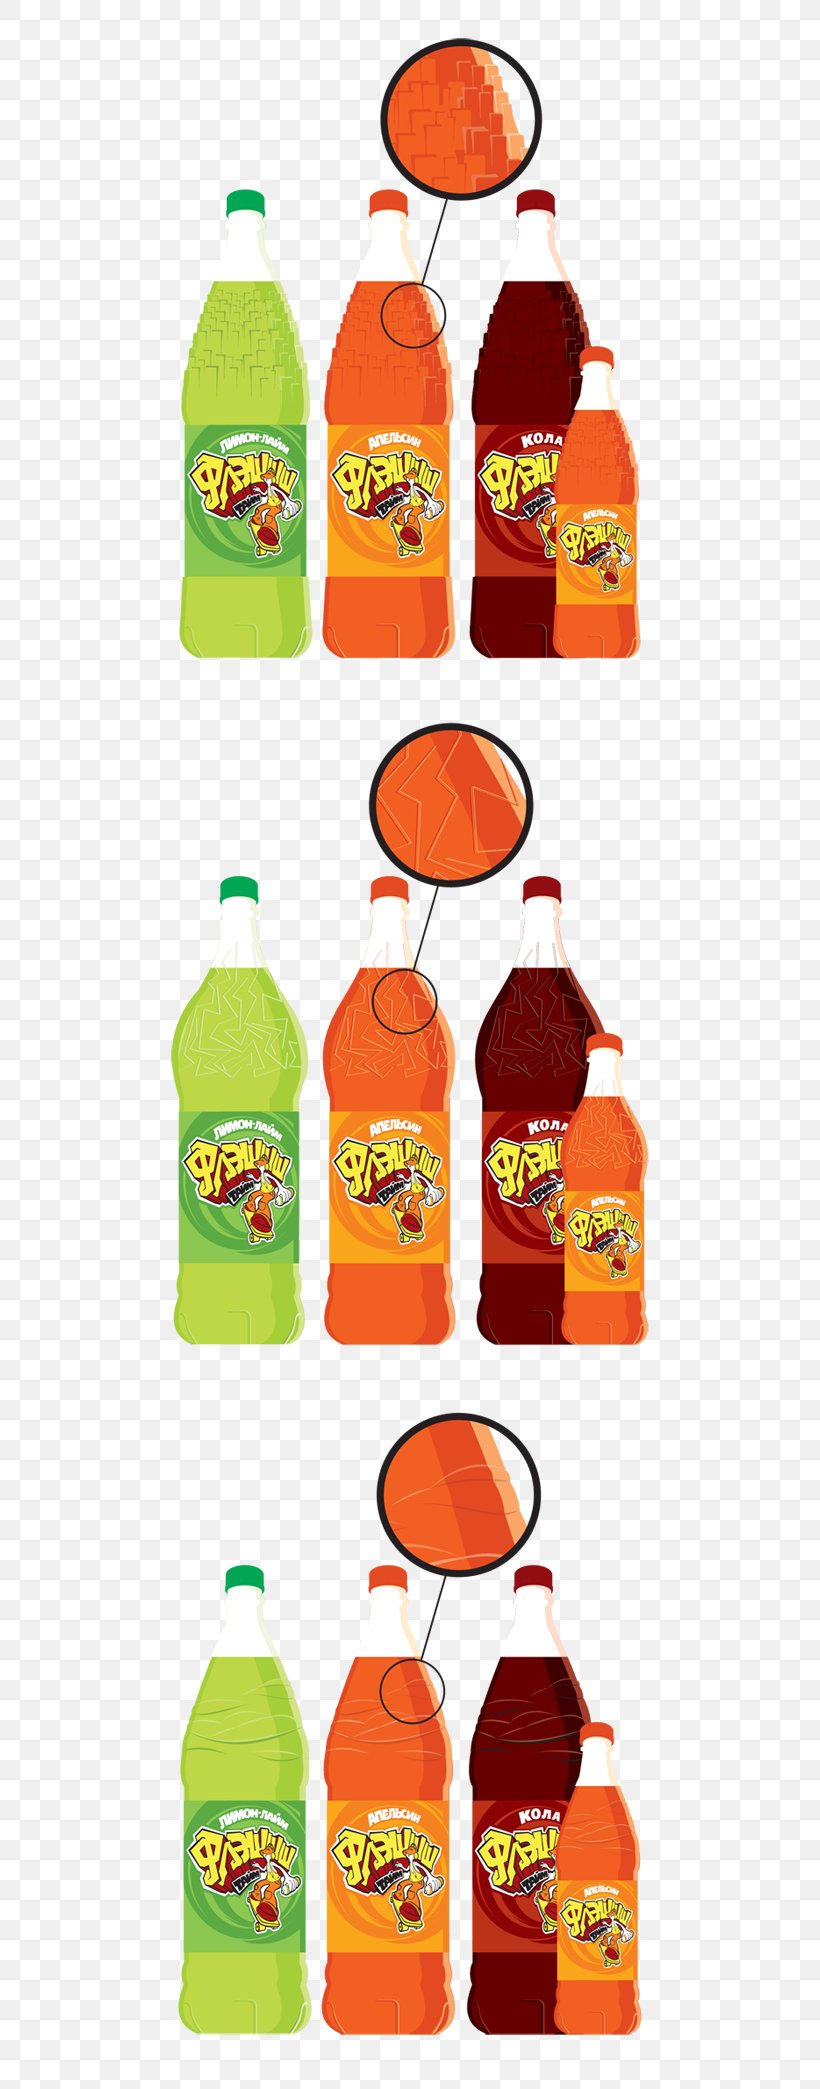 Product Design Brand Packaging And Labeling Clip Art, PNG, 600x2089px, Brand, Label, Orange Sa, Packaging And Labeling Download Free